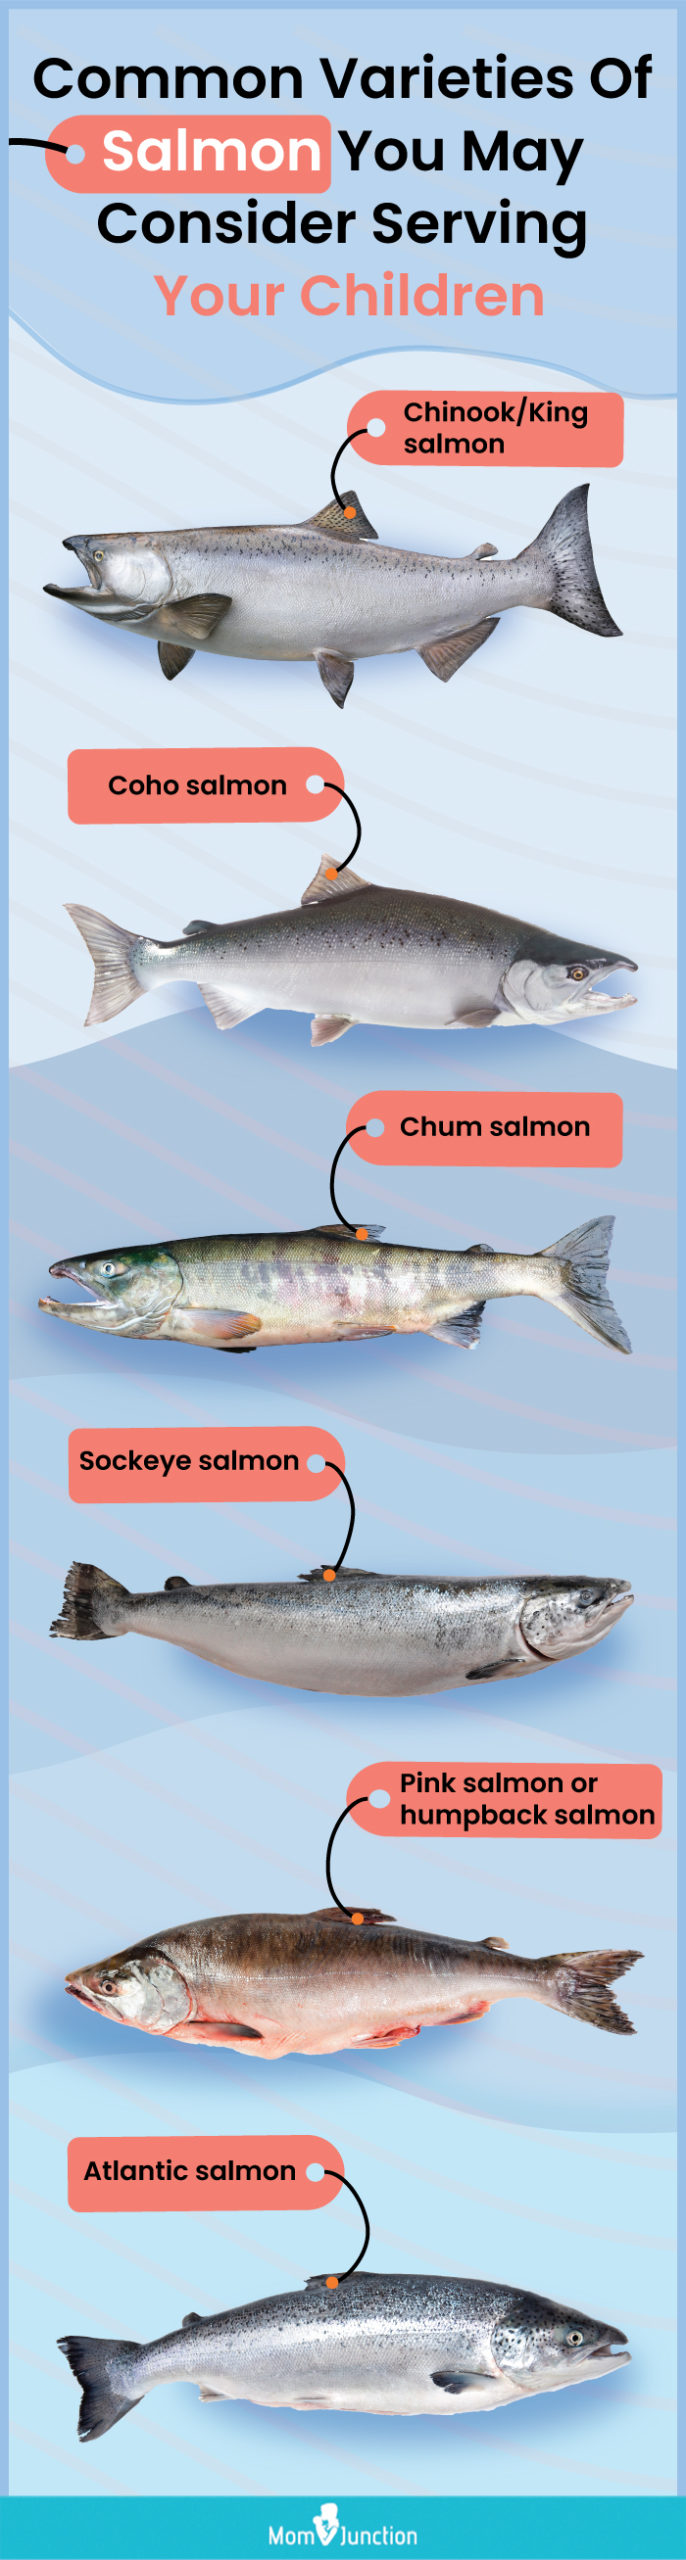 common varieties of salmon yyou may consider serving your children (infographic)